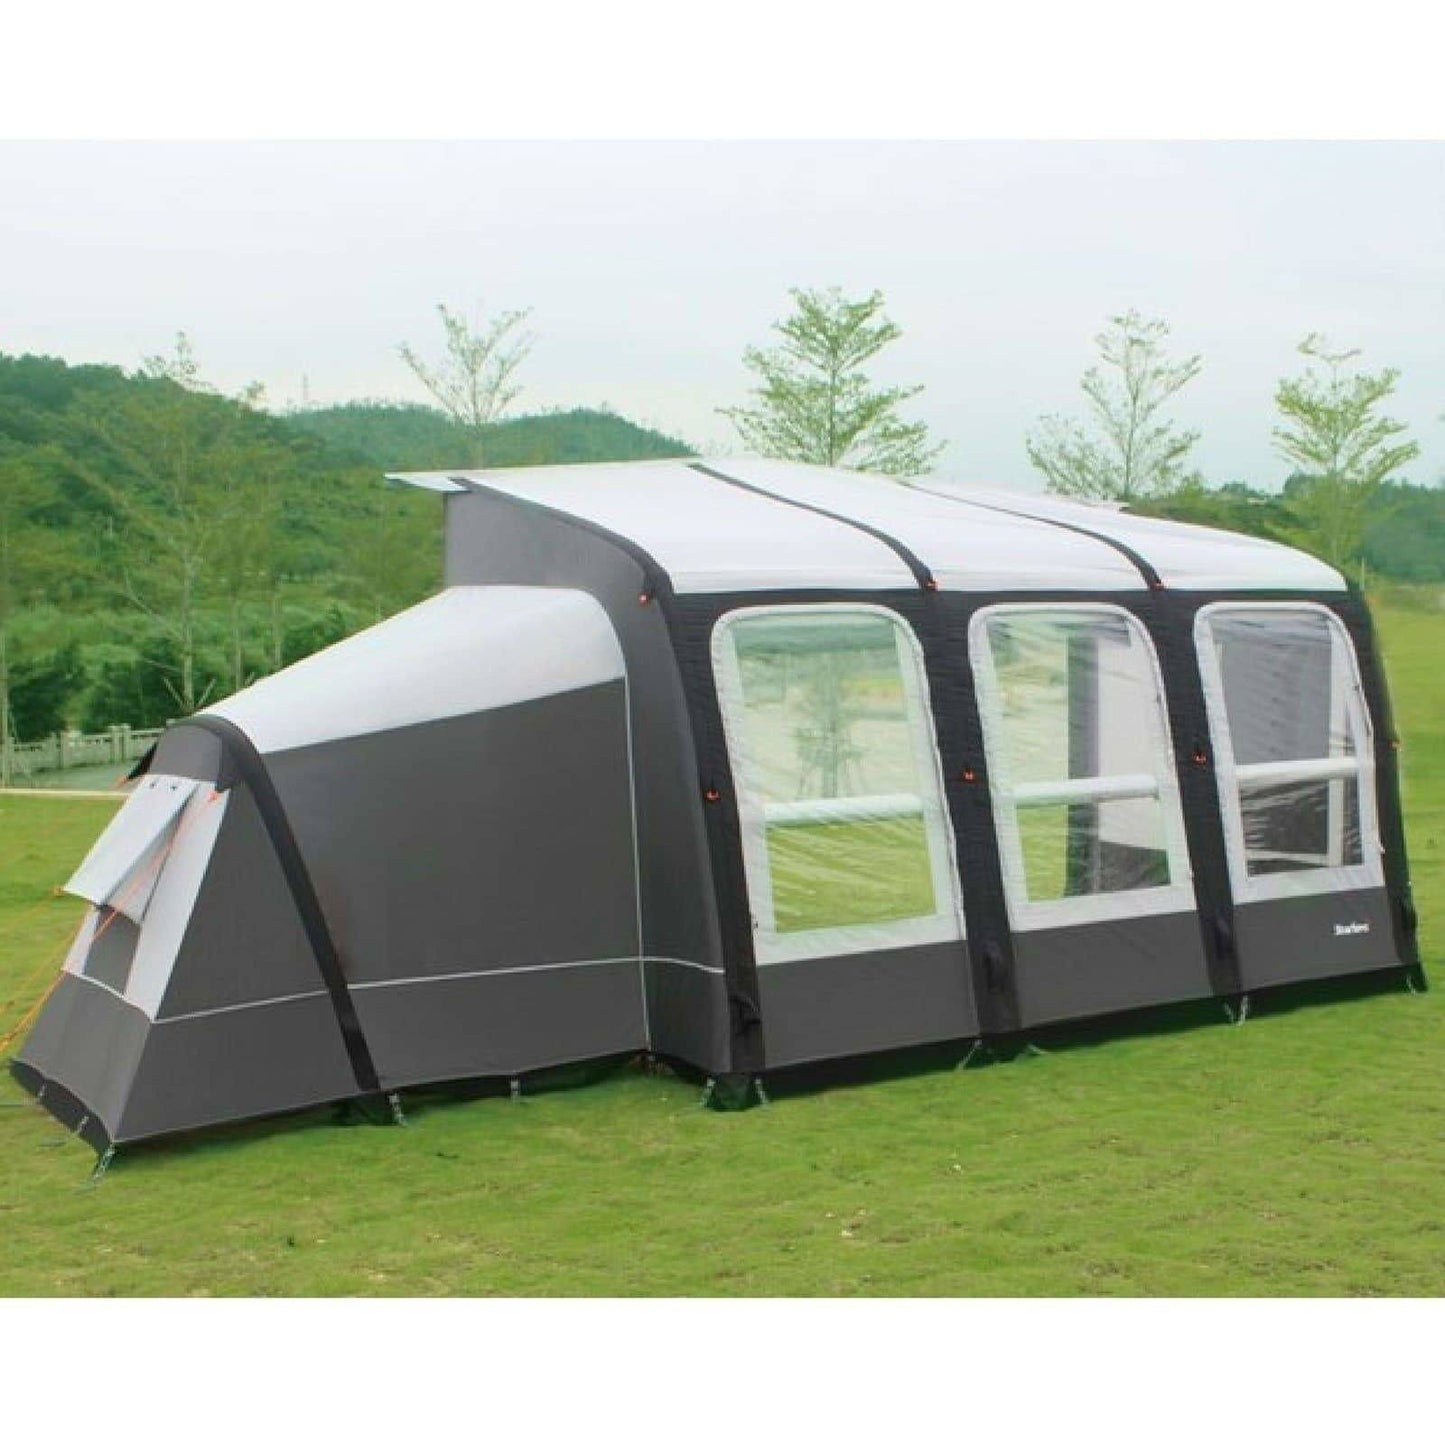 Camptech Starline 390 Blue Inflatable Air Porch Caravan Awning + FREE Straps (2019)